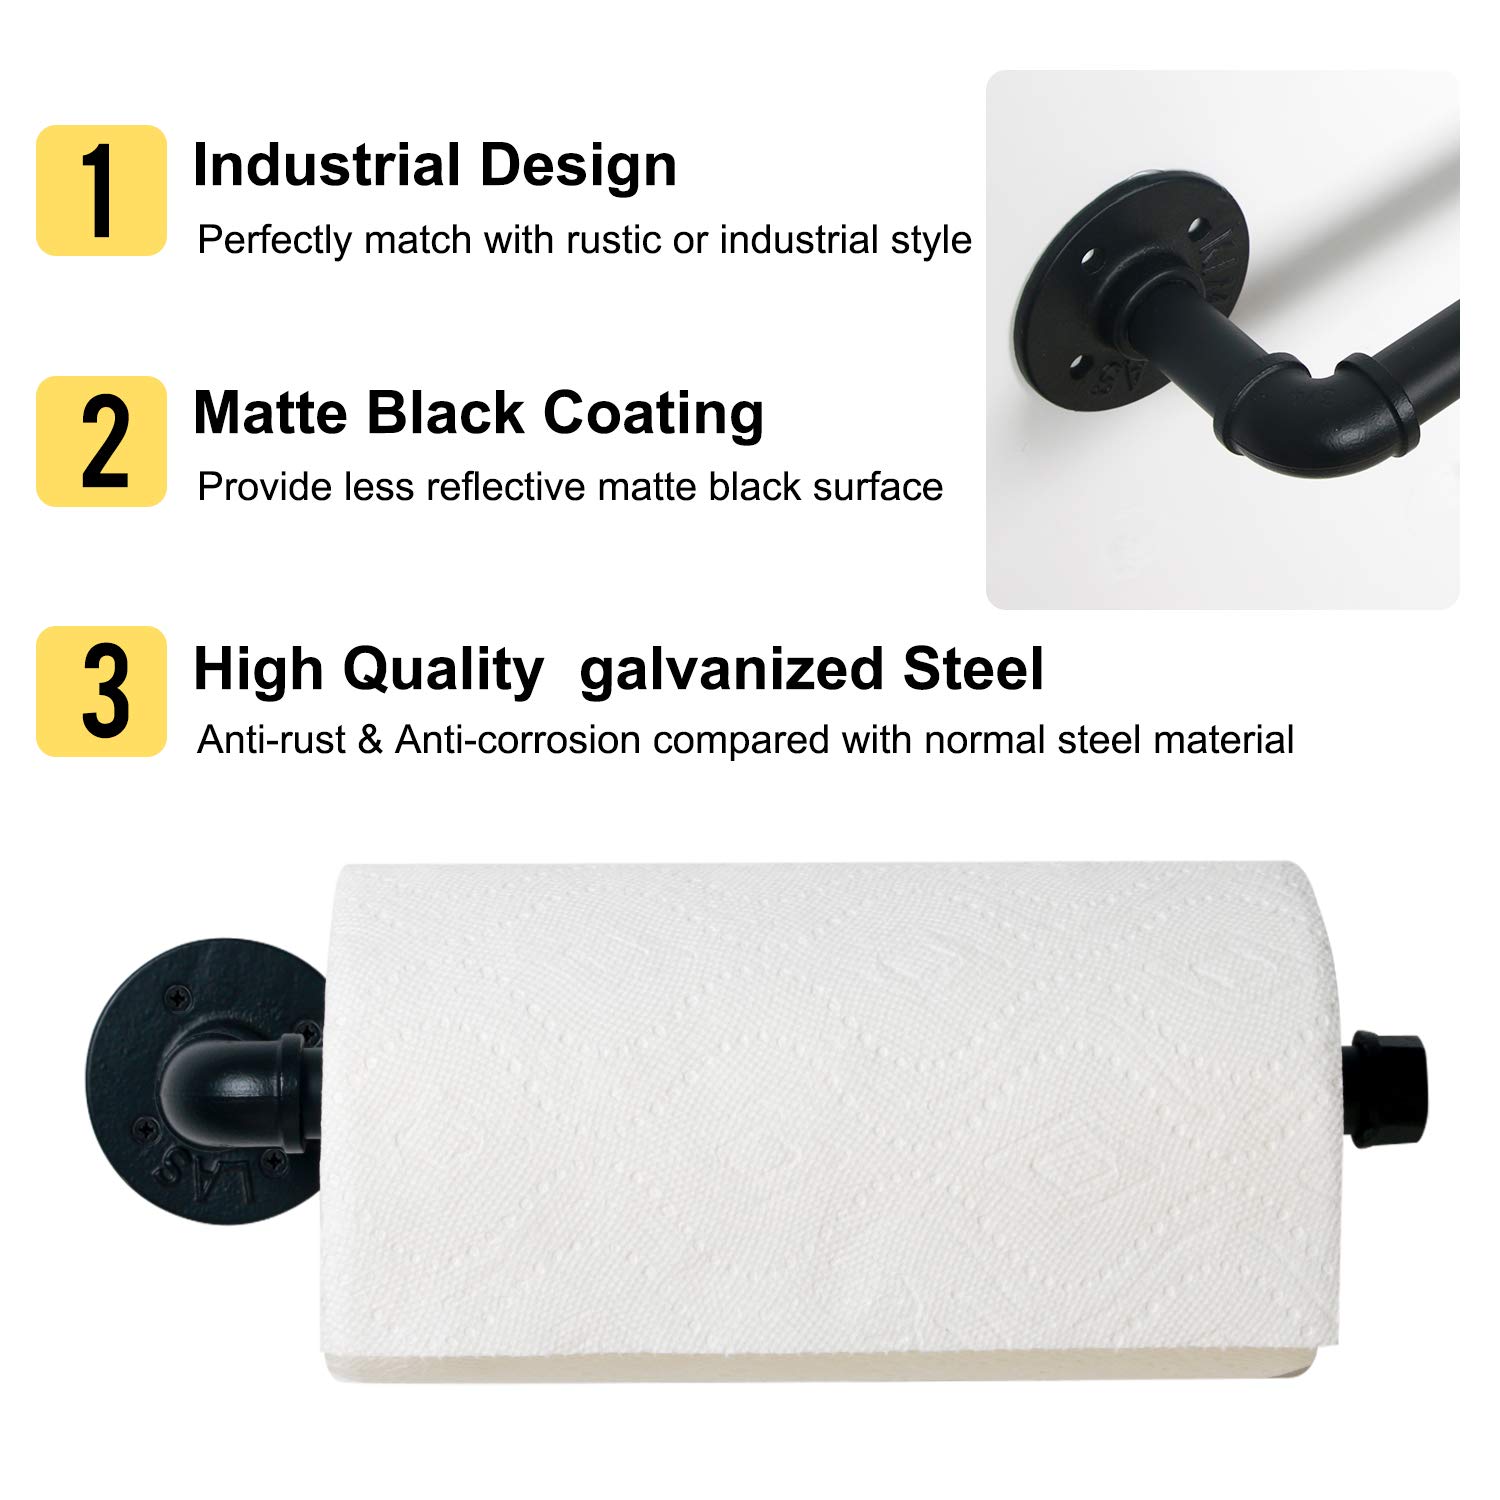 HouseAid Industrial Pipe Paper Towel Holder for Kitchen, Vintage Style Heavy Duty DIY Rustic Paper Towel Rack, Wall Mount, Matte Black